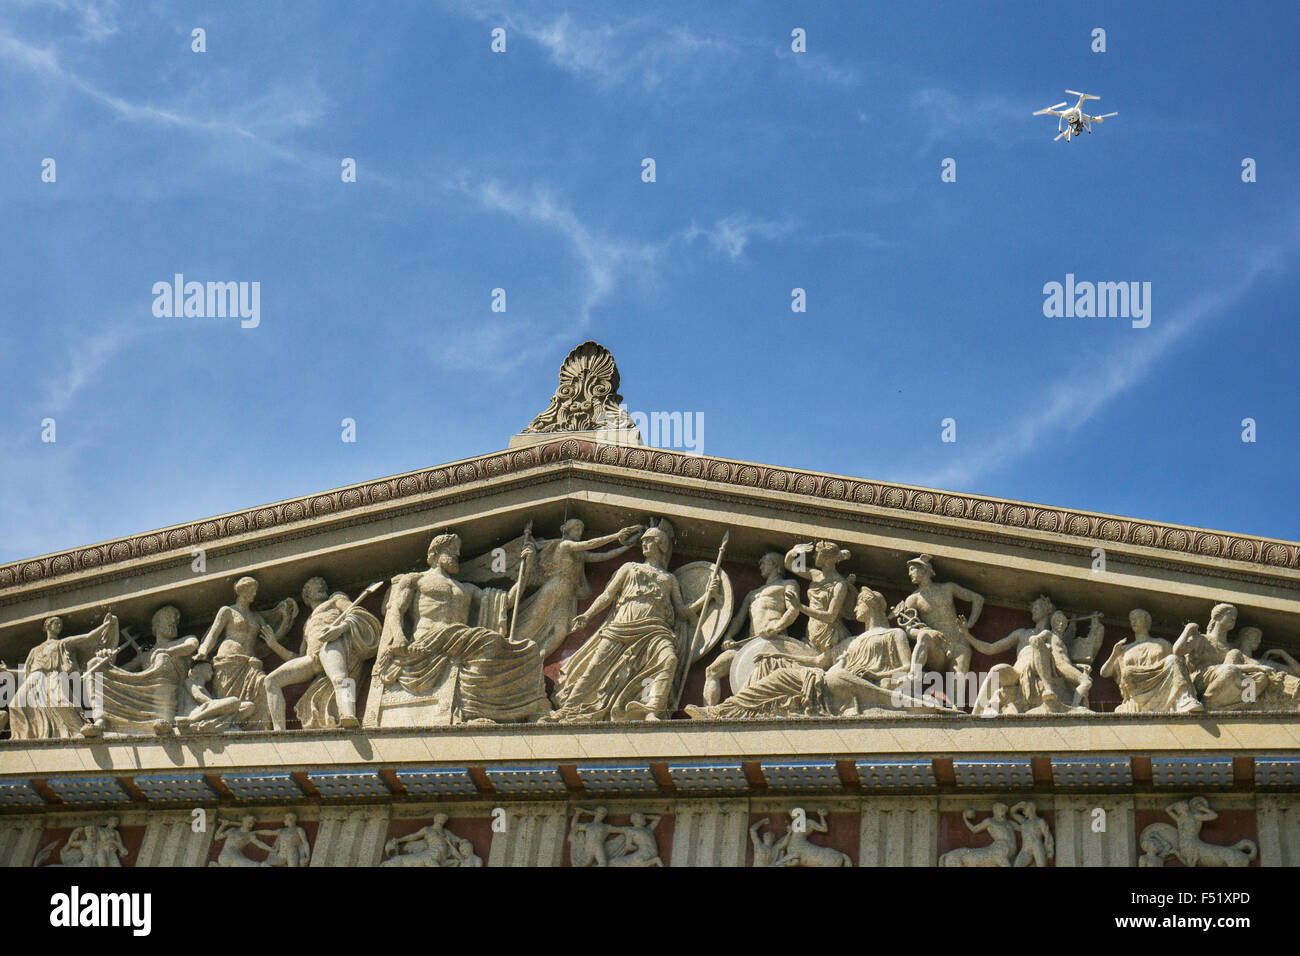 Drone flying over The Parthenon in Nashville, Tennessee  a full-scale replica of the original Parthenon in Athens. Stock Photo